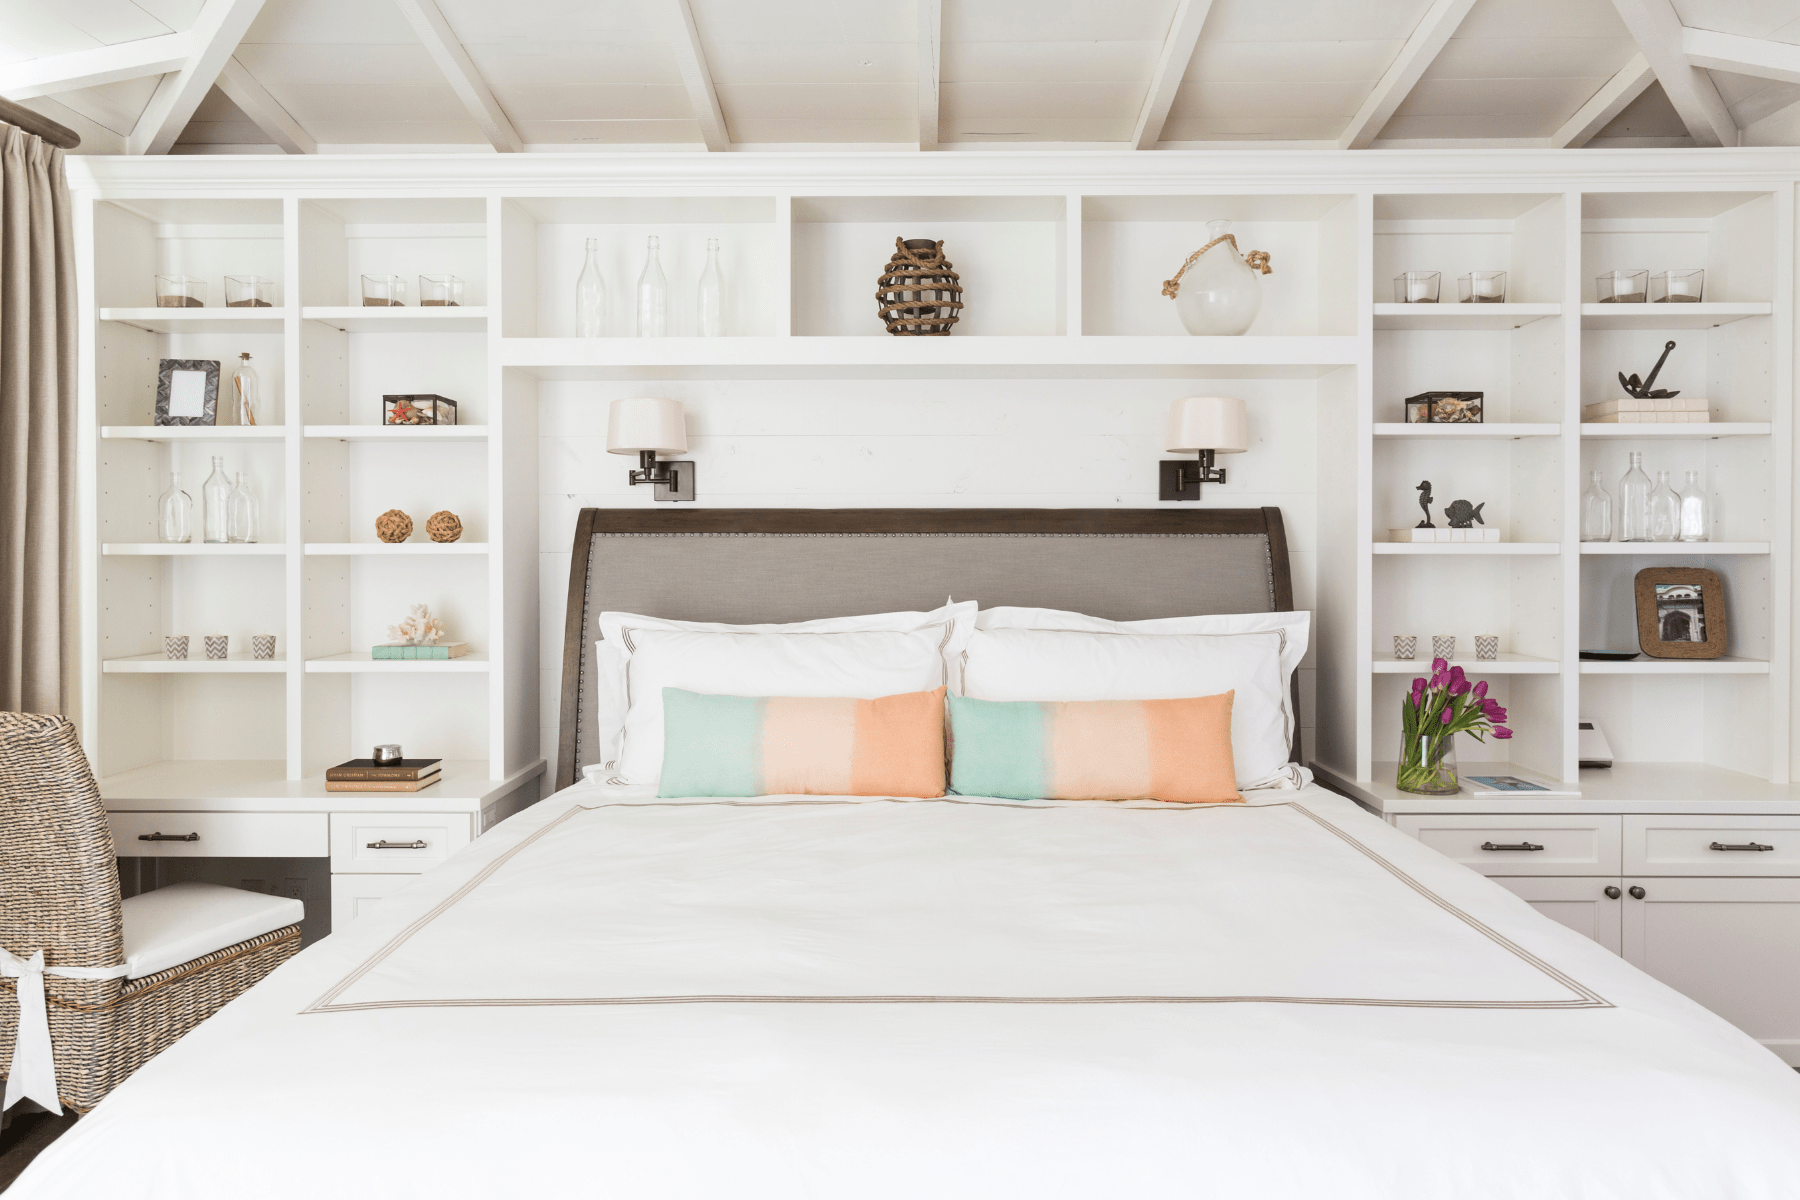 The Sandhill Shores master bedroom featuring bright peach and soft blue colors below a sloped ceiling with wooden beams.